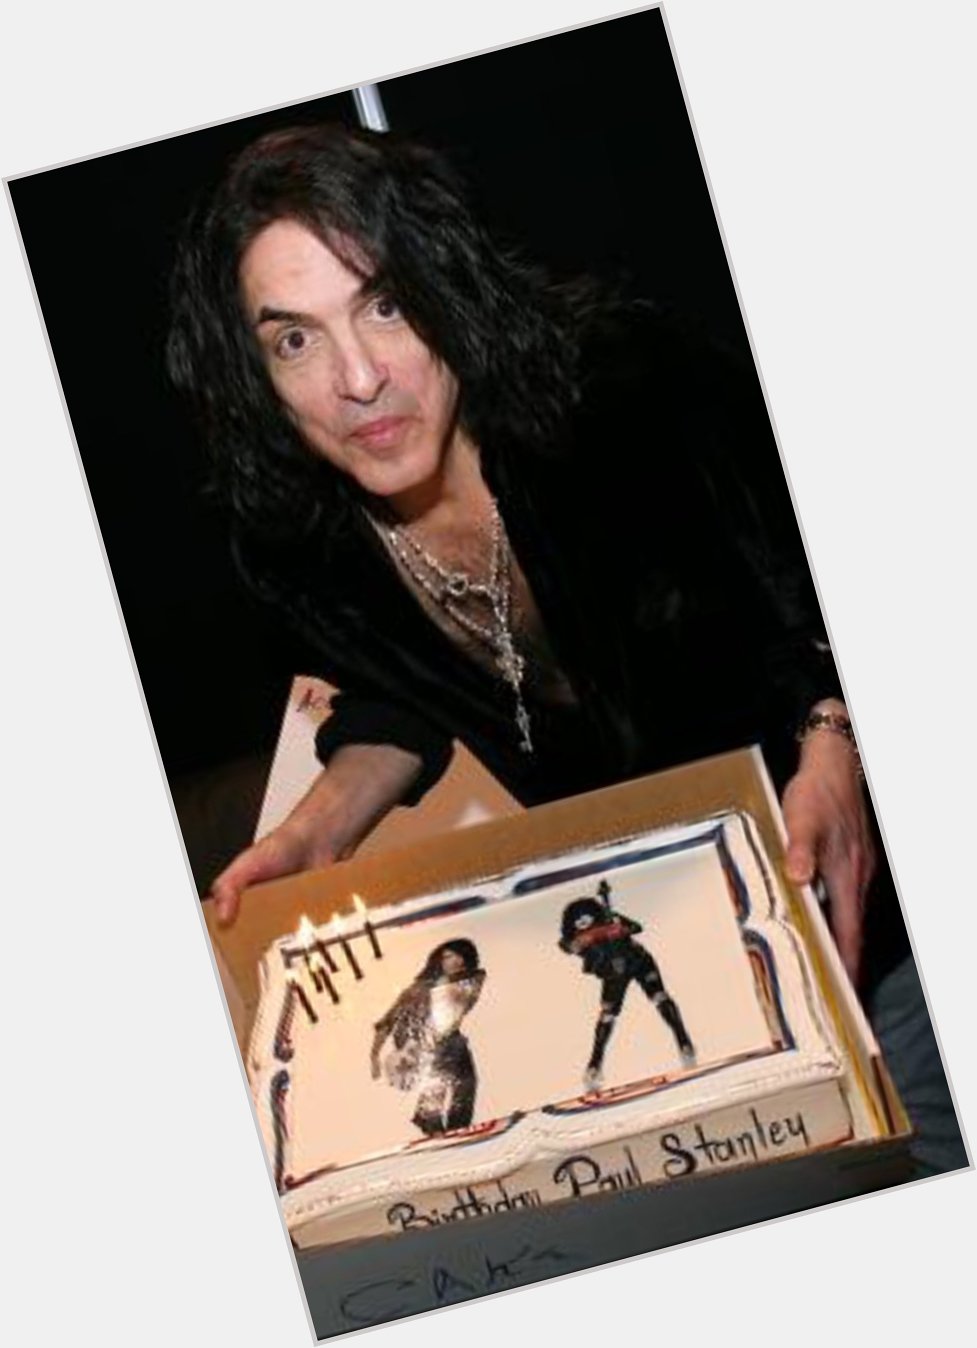 Happy Bday to the Rev, Frontman, Main Man, Starchild. Sir Paul Stanley. Rock Royalty for Sure! 